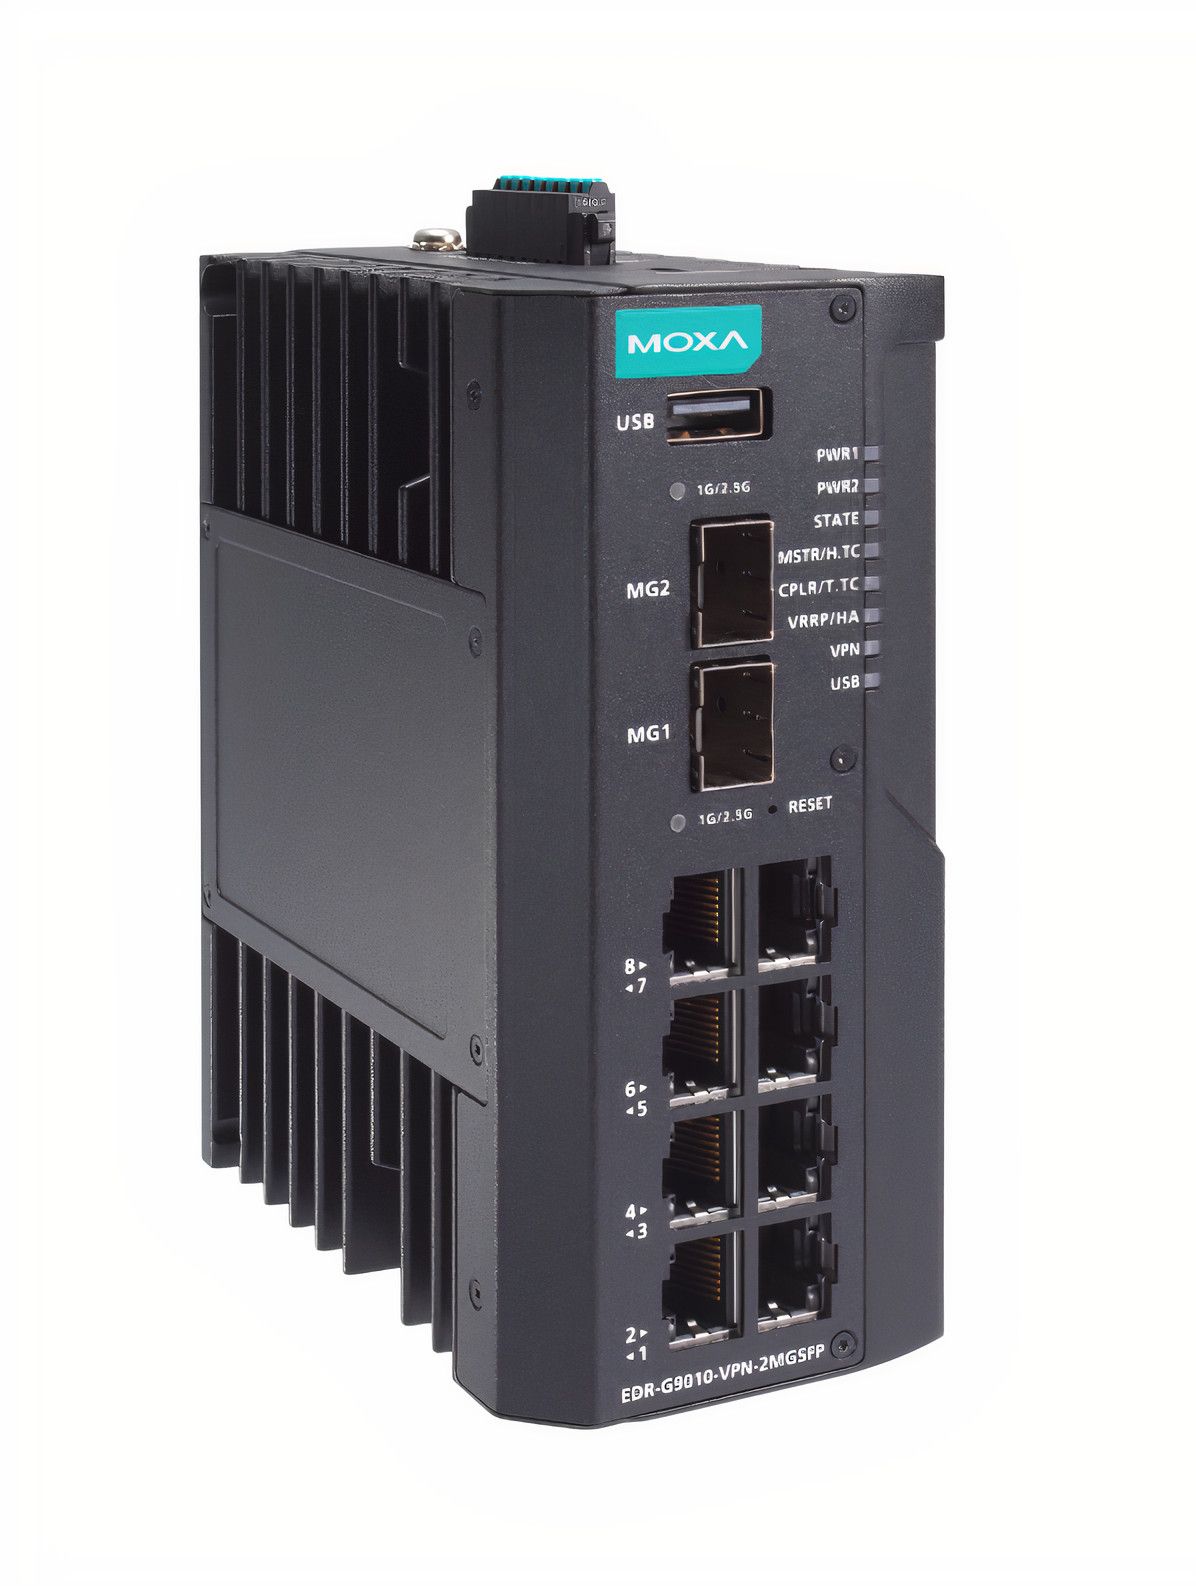 Industrial Secure Routers Protect Against Cyber Threats